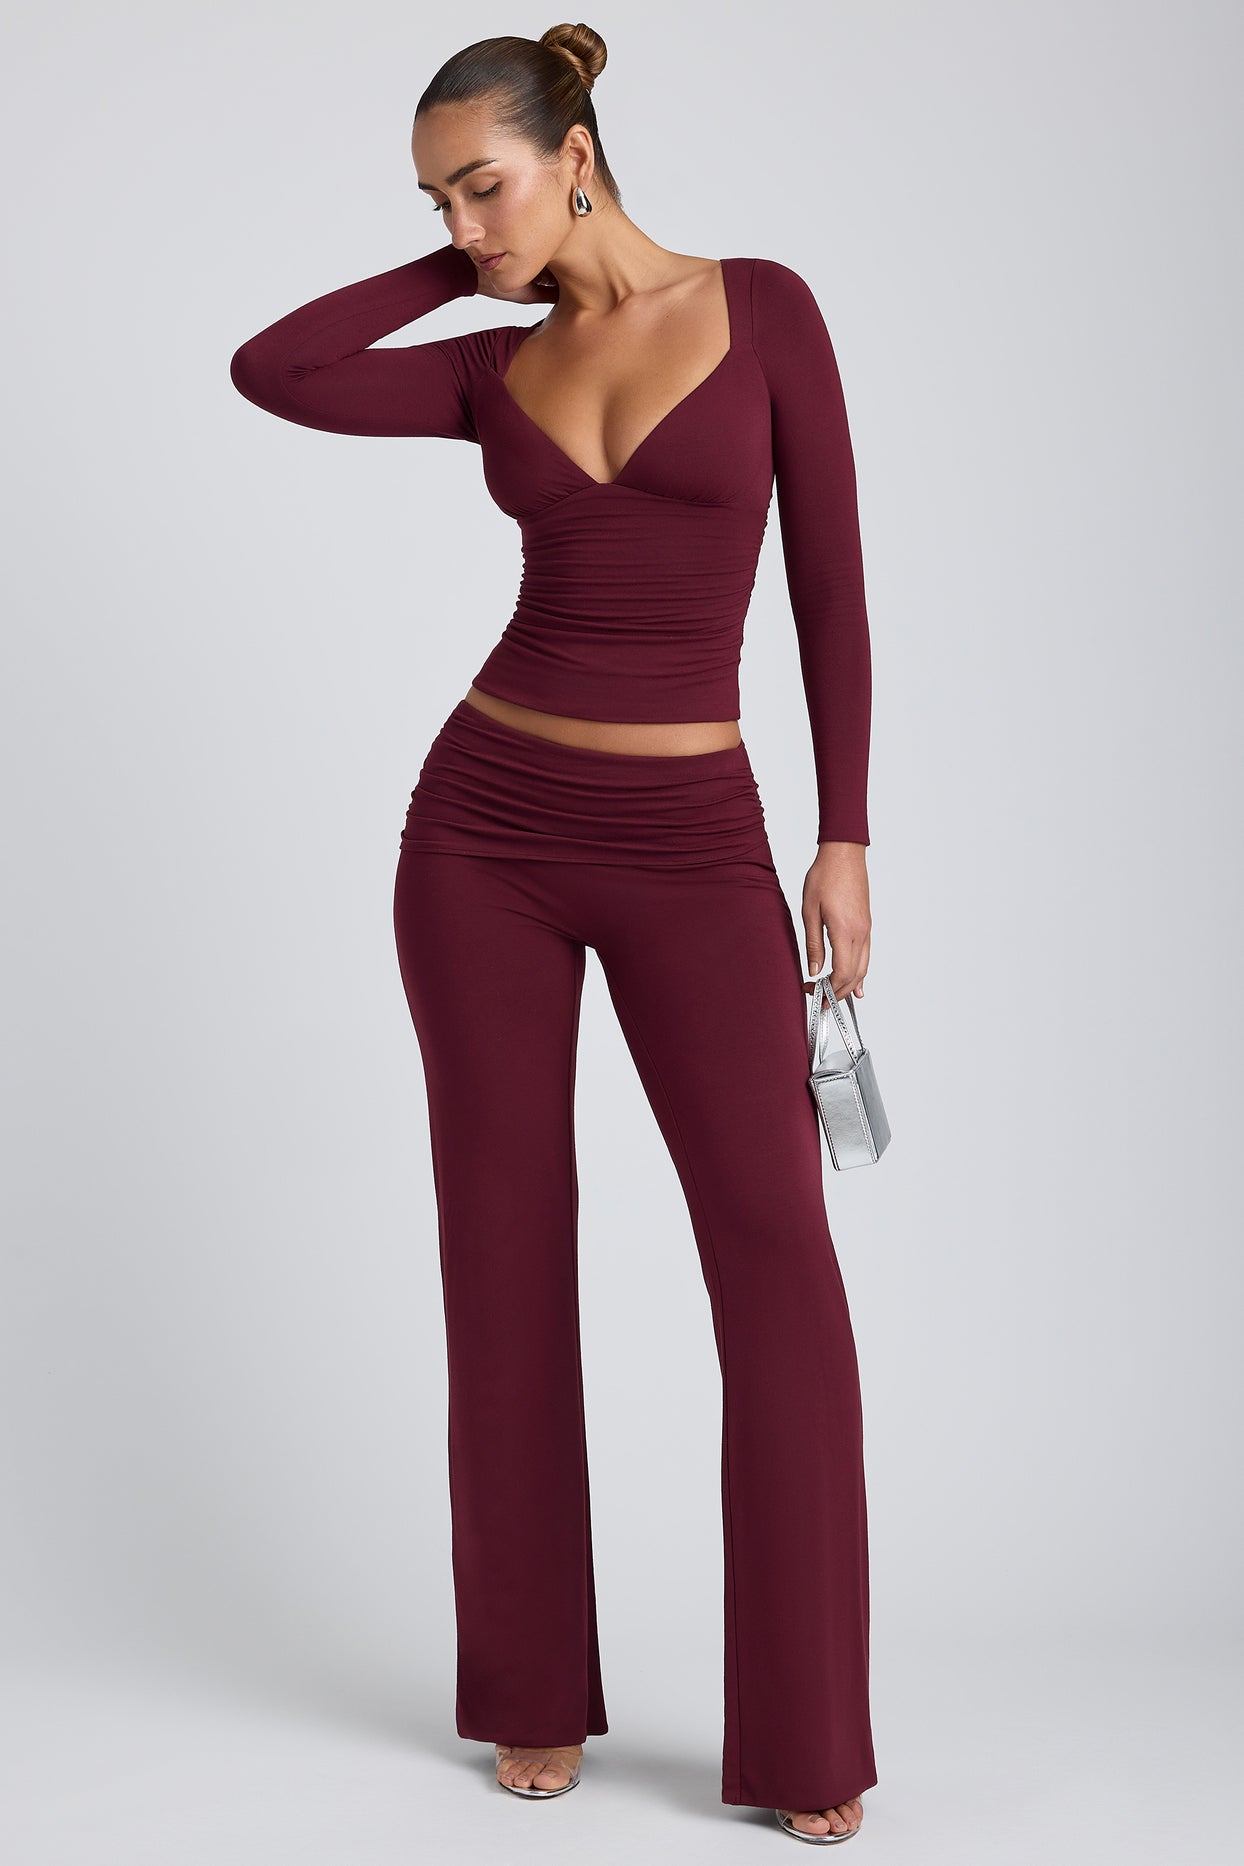 Modal Ruched Long-Sleeve Top in Plum